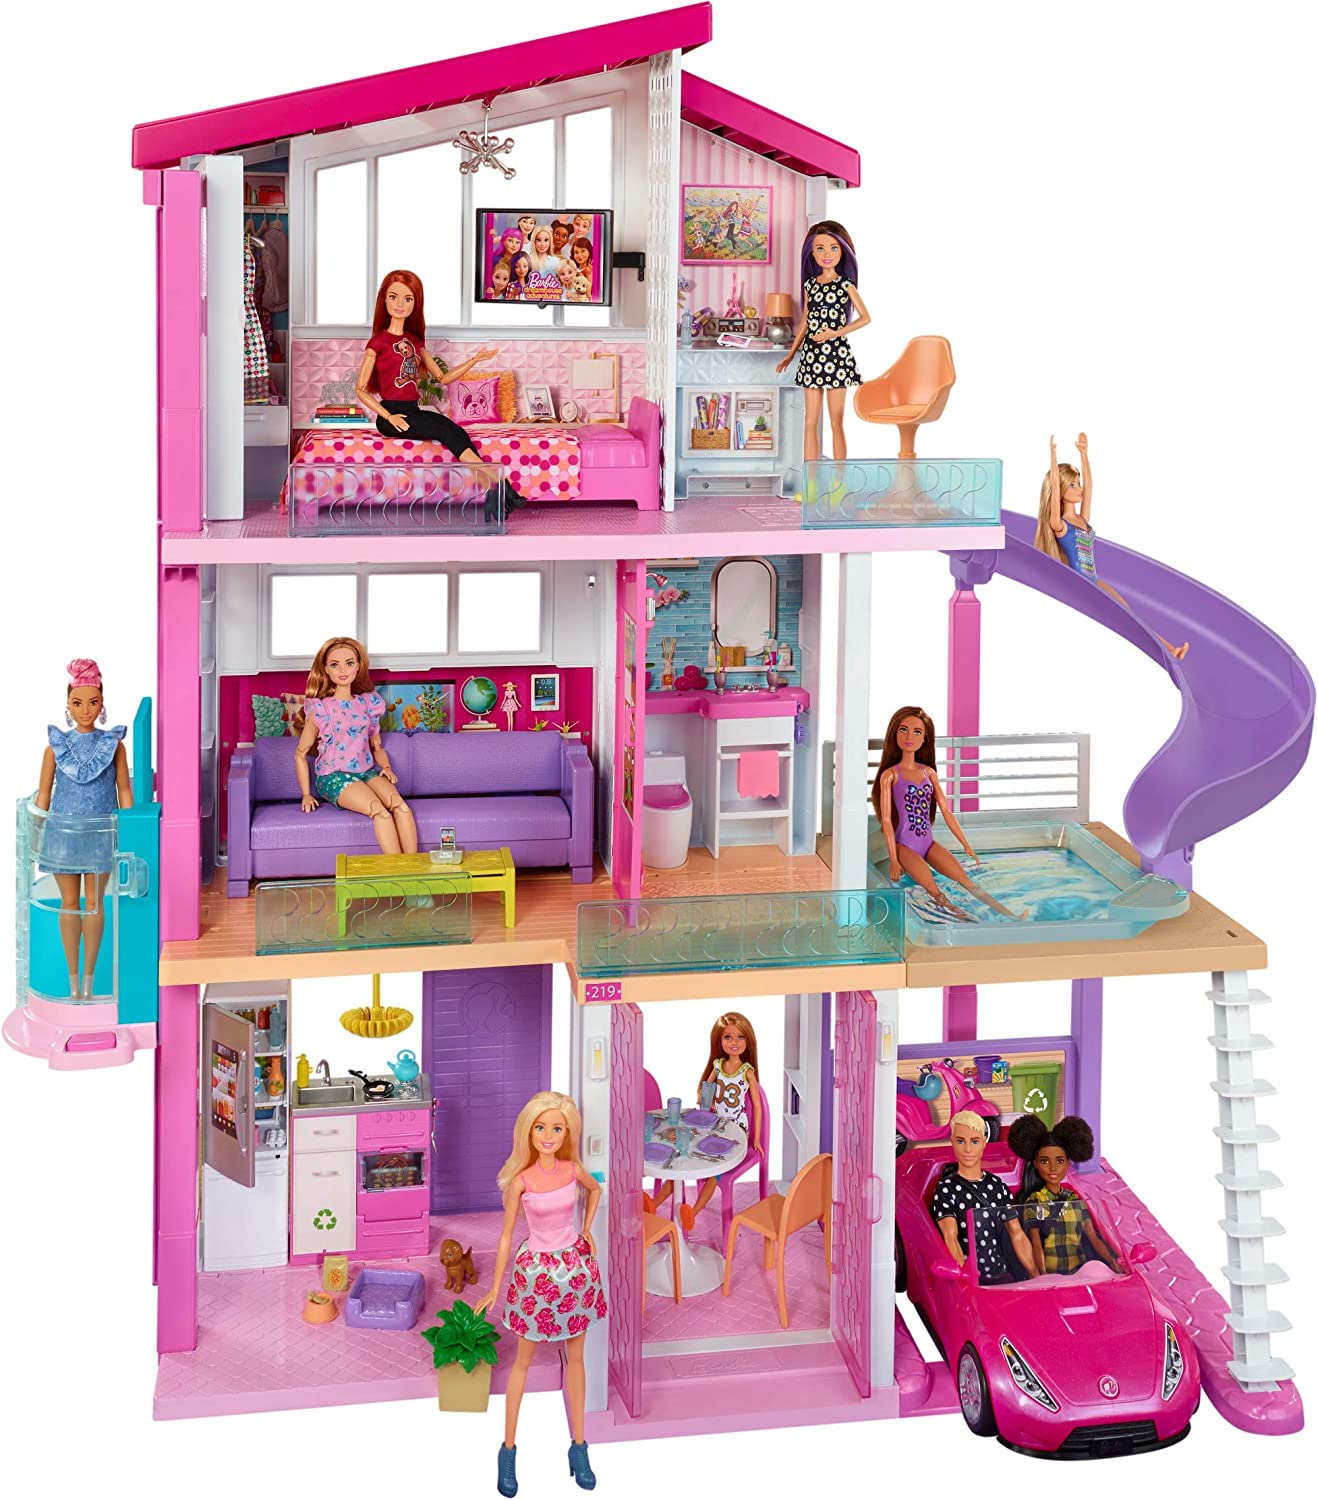 Review of Barbie Dreamhouse Dollhouse with Pool, Slide and Elevator